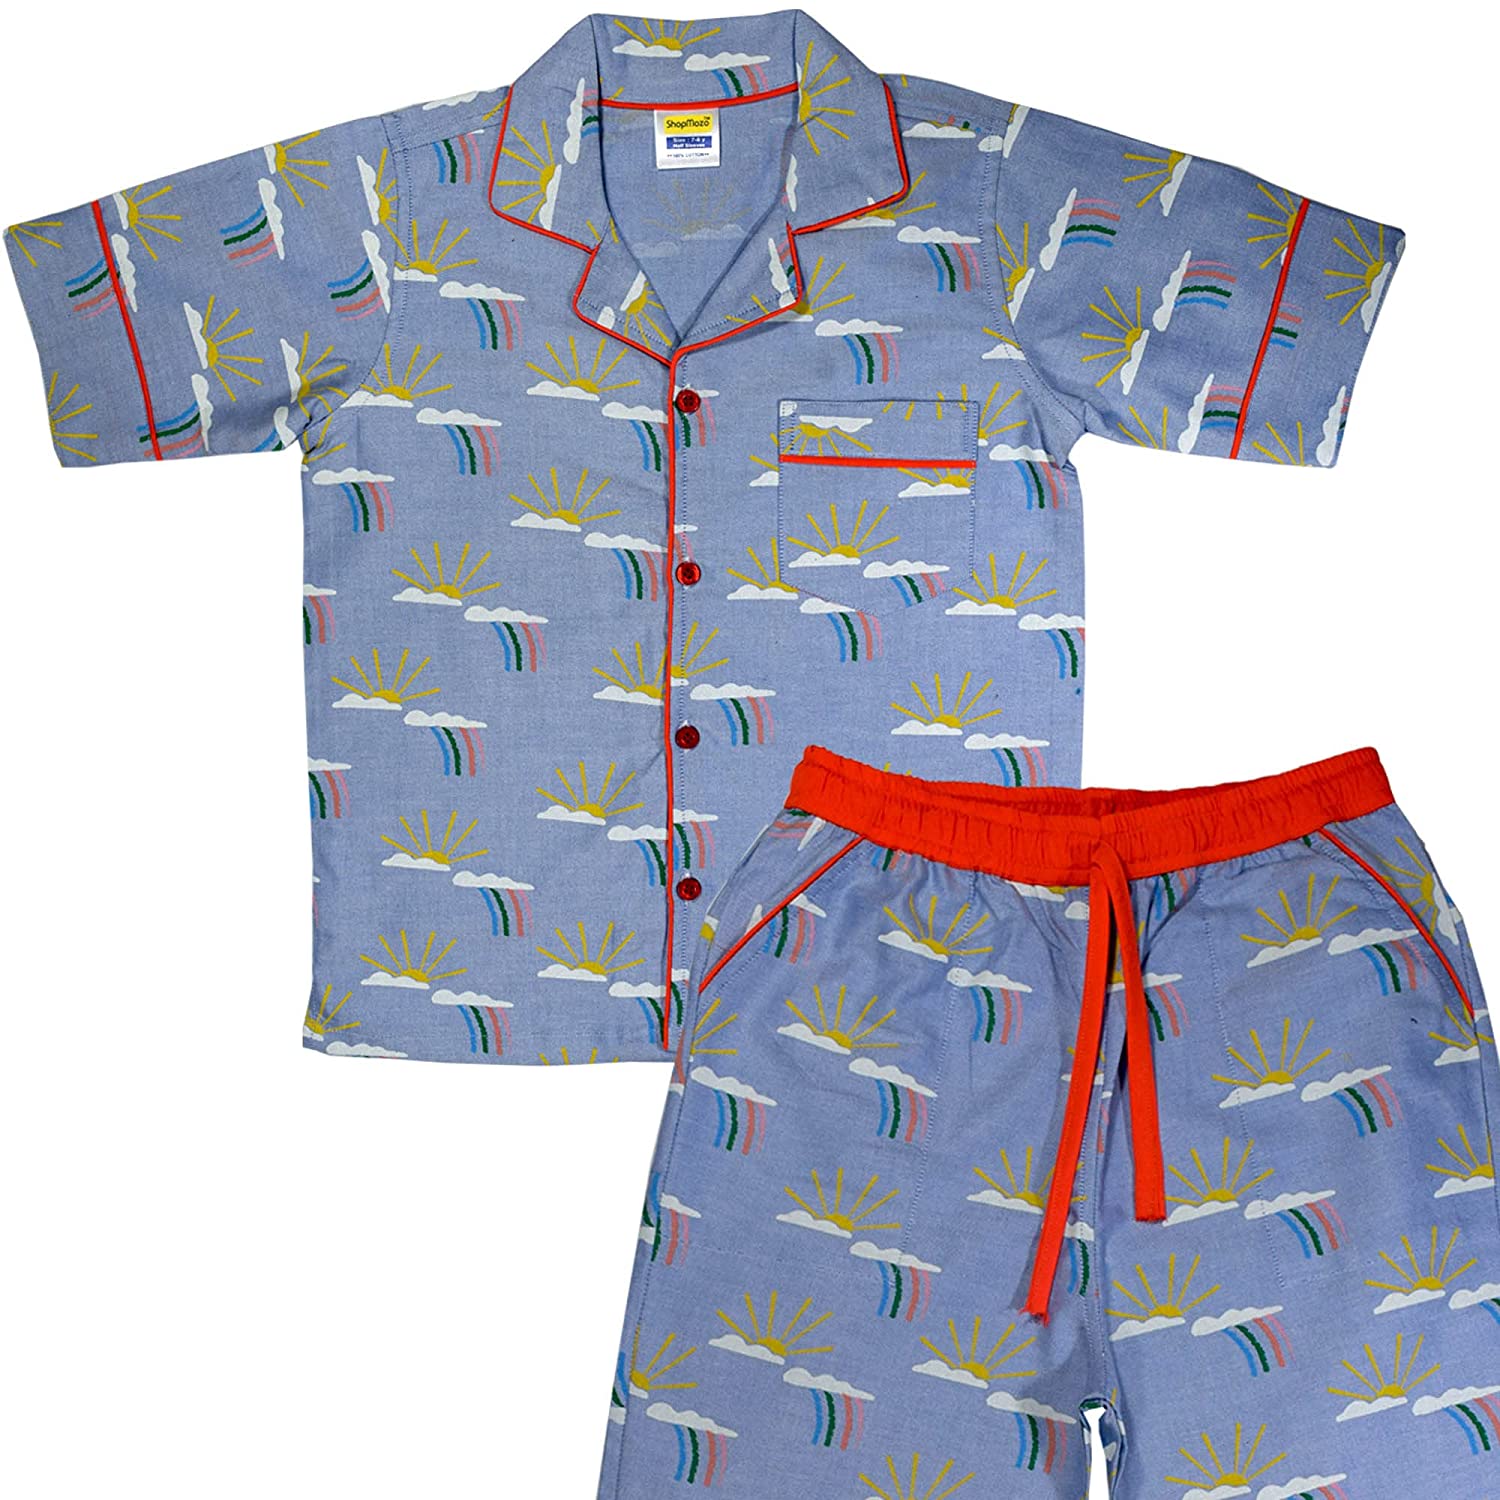 Night suits for kids: Comfort should be prioritised | HT Shop Now